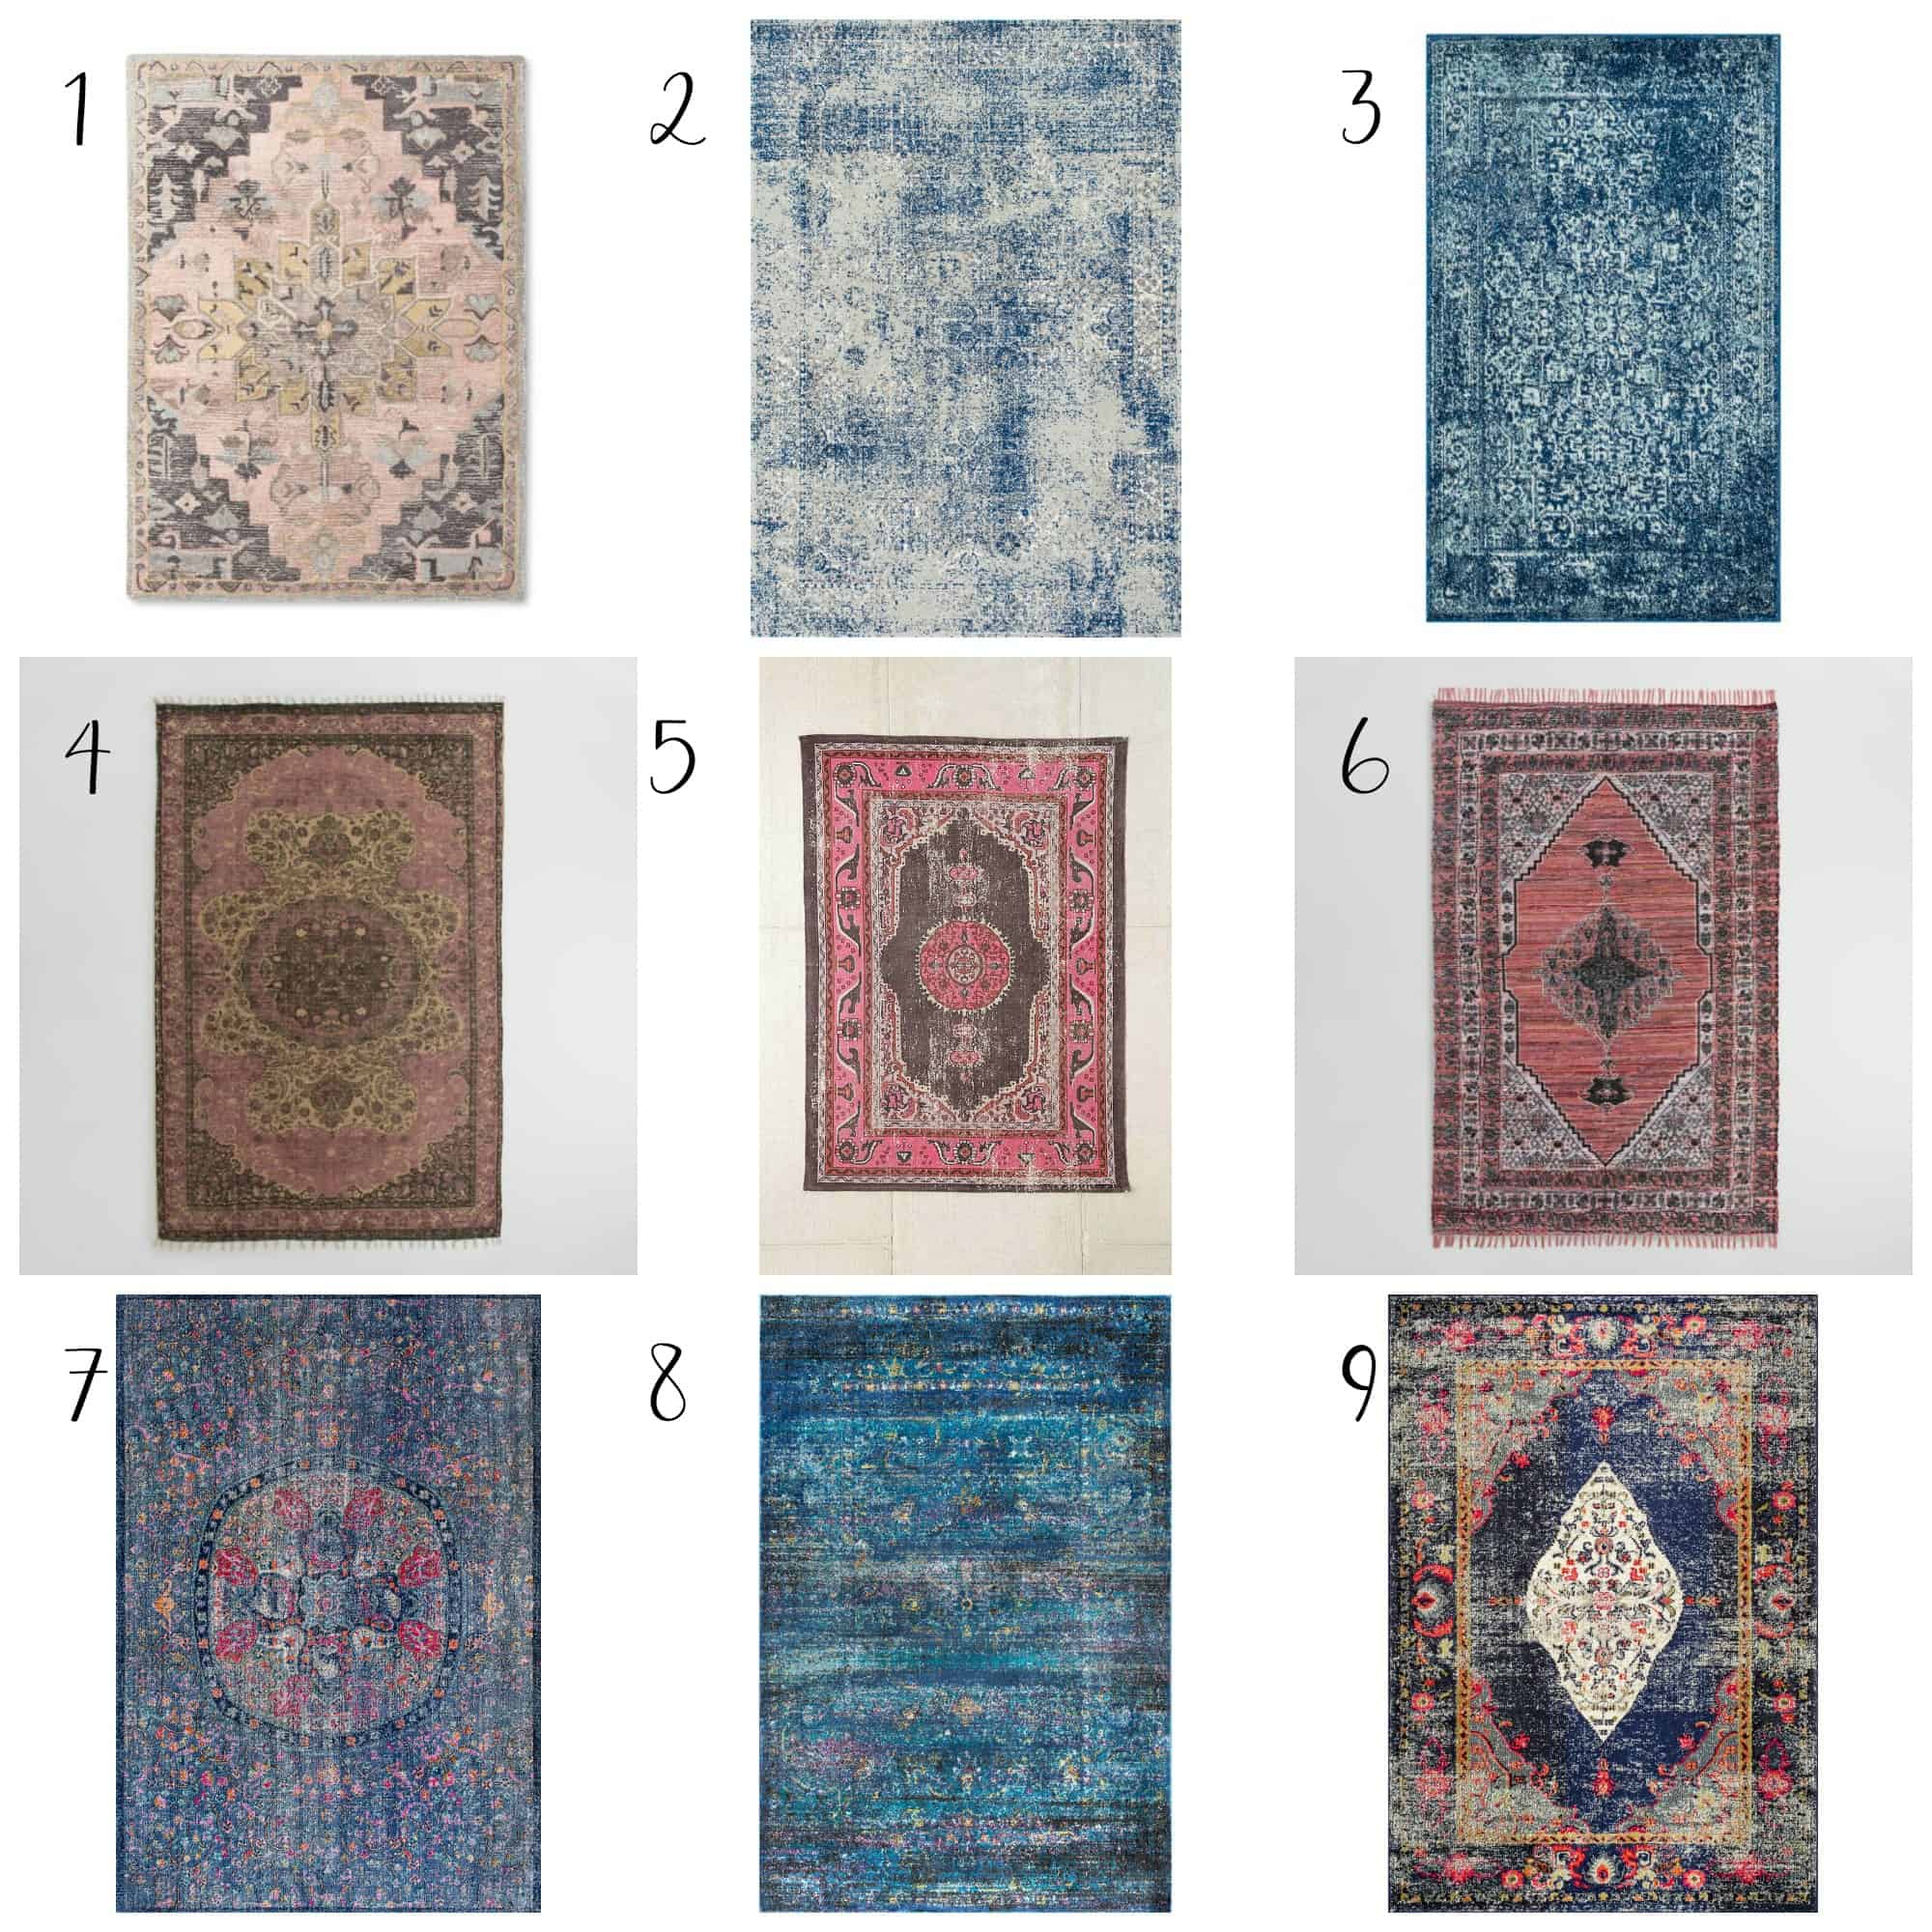 Want to learn how to layer rugs? Check out these guide! 